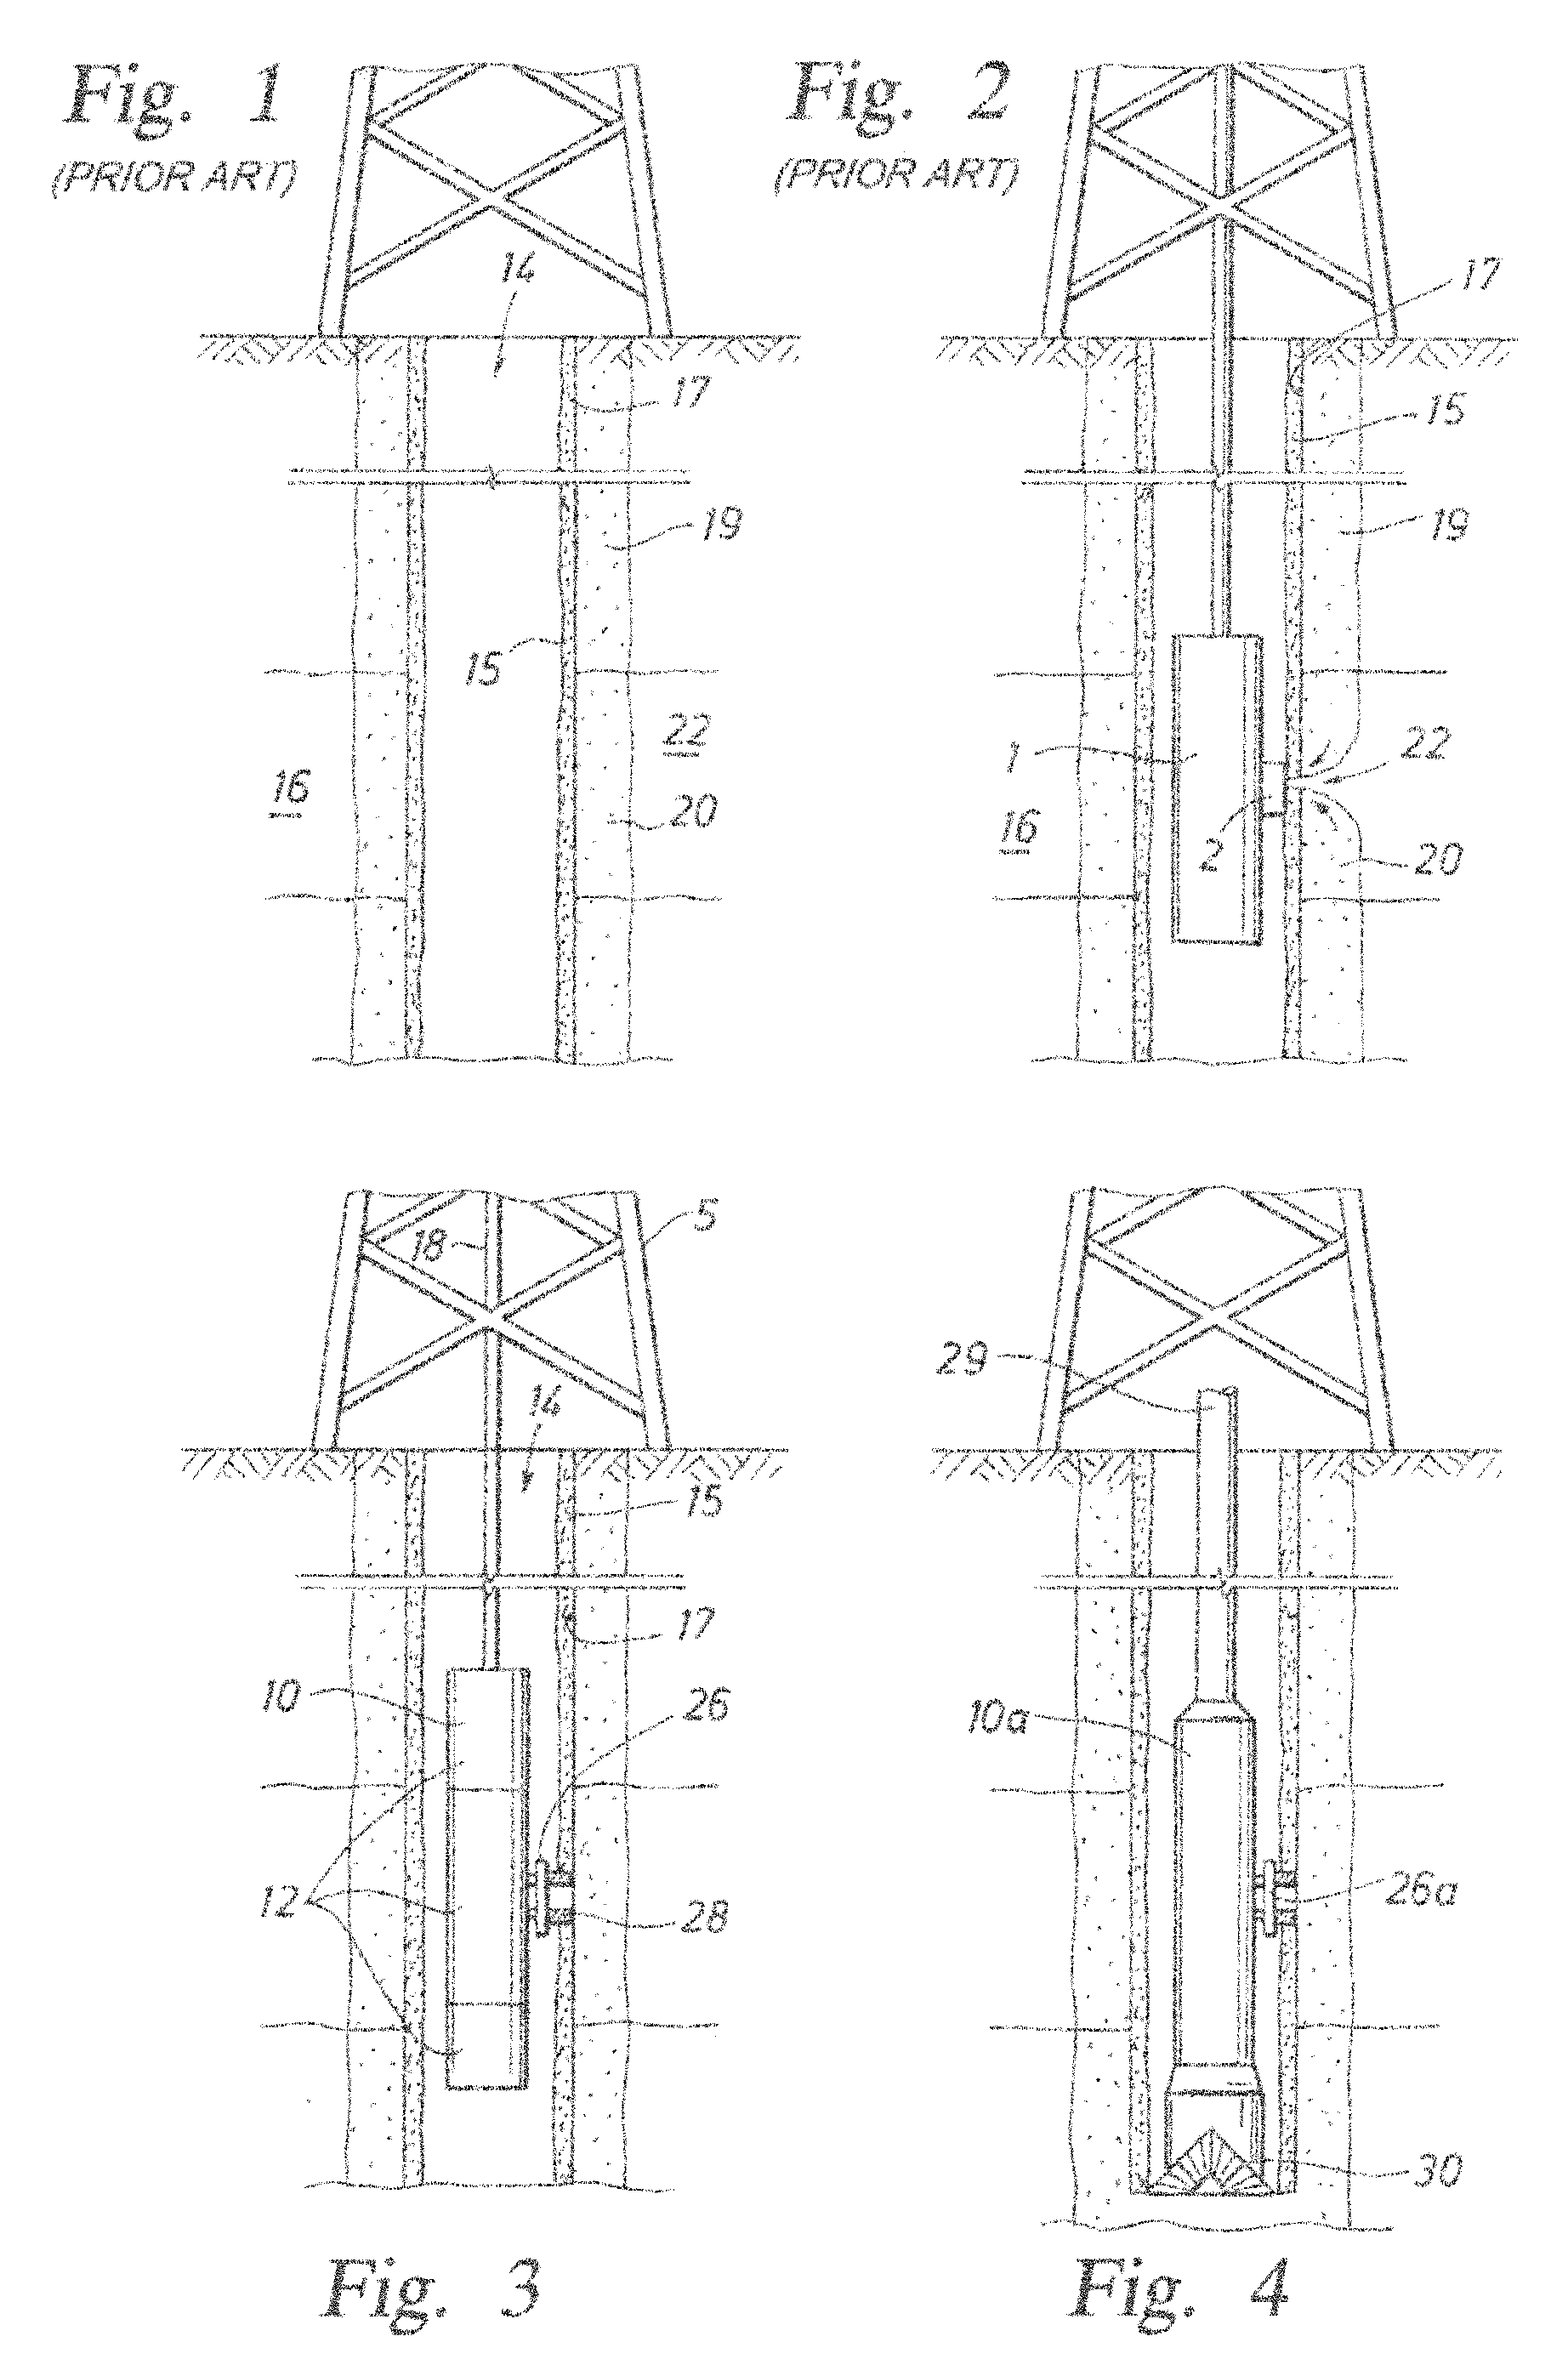 Formation Evaluation System and Method